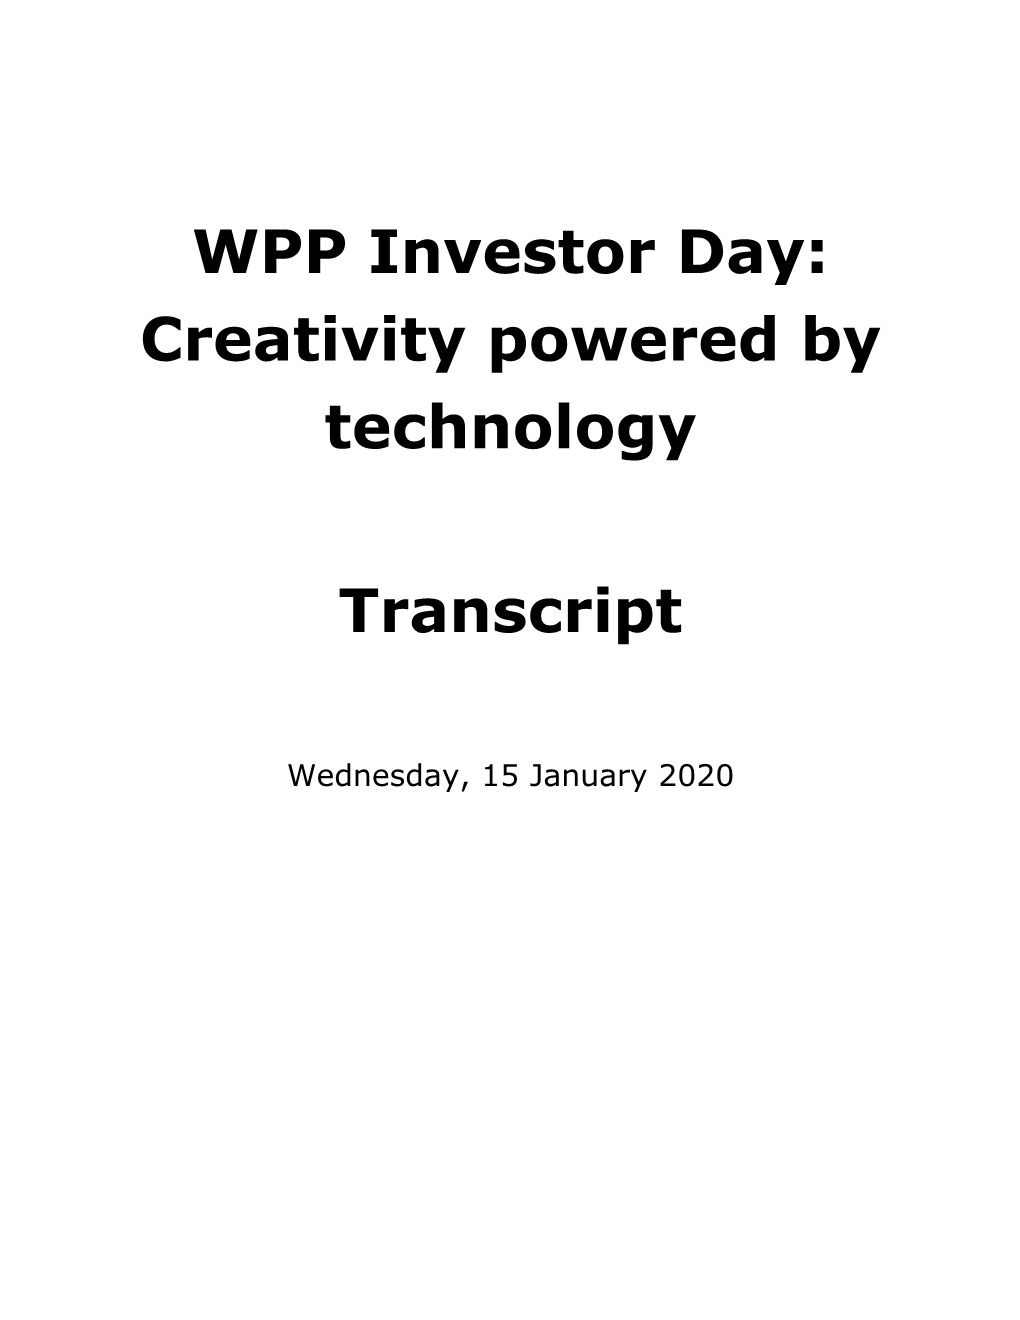 WPP Investor Day: Creativity Powered by Technology Transcript